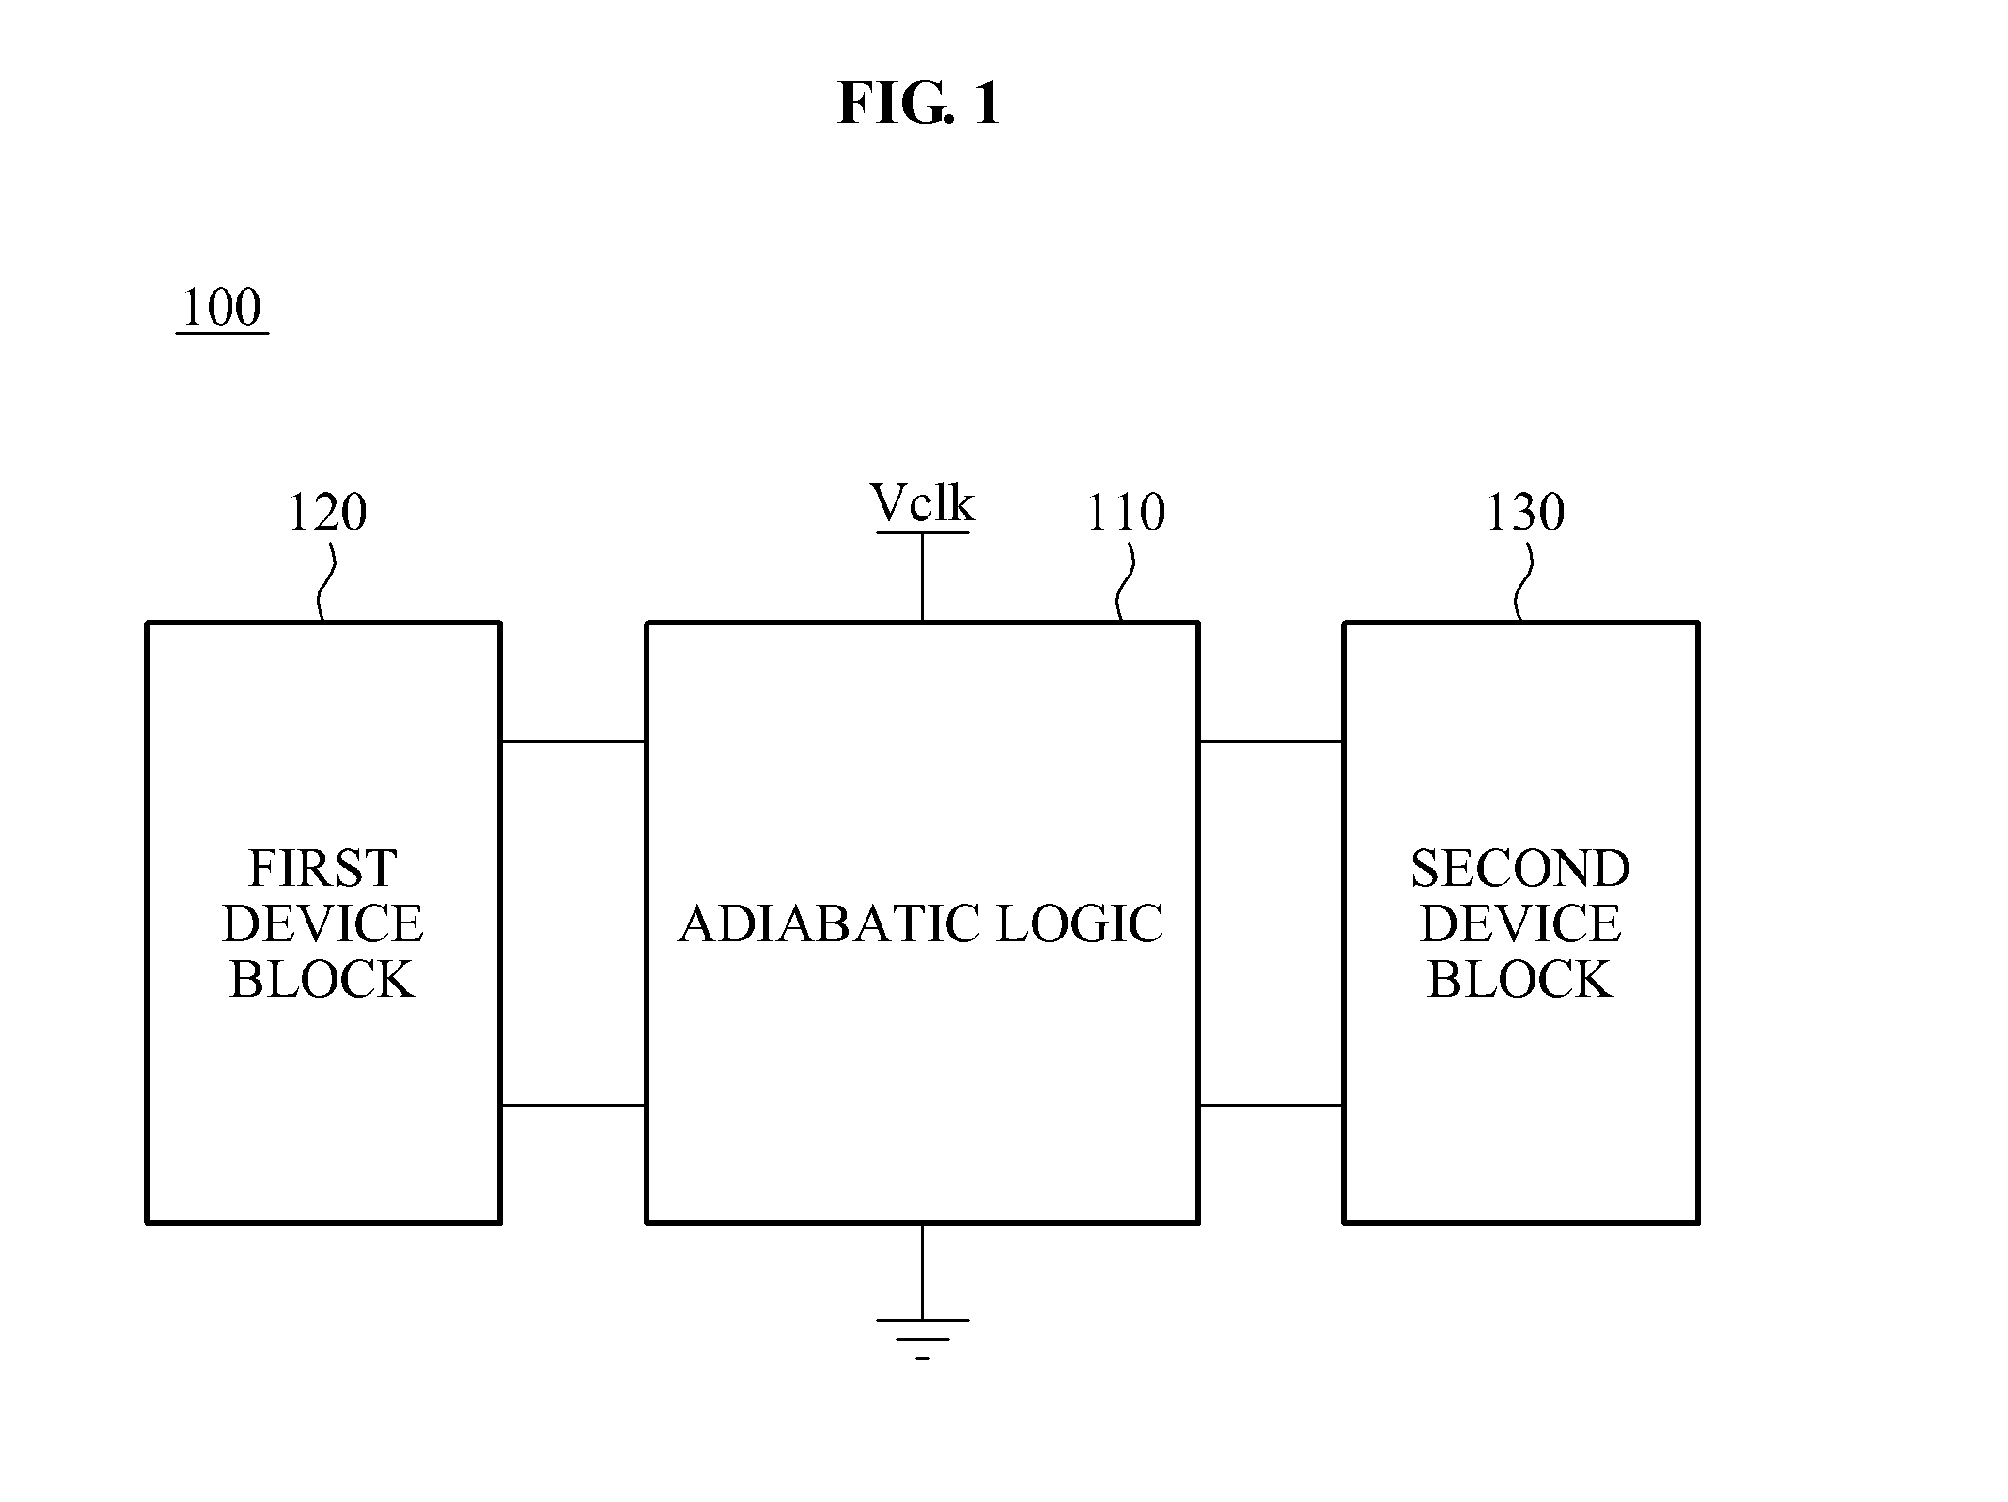 Apparatus for clocked power logic against power analysis attack